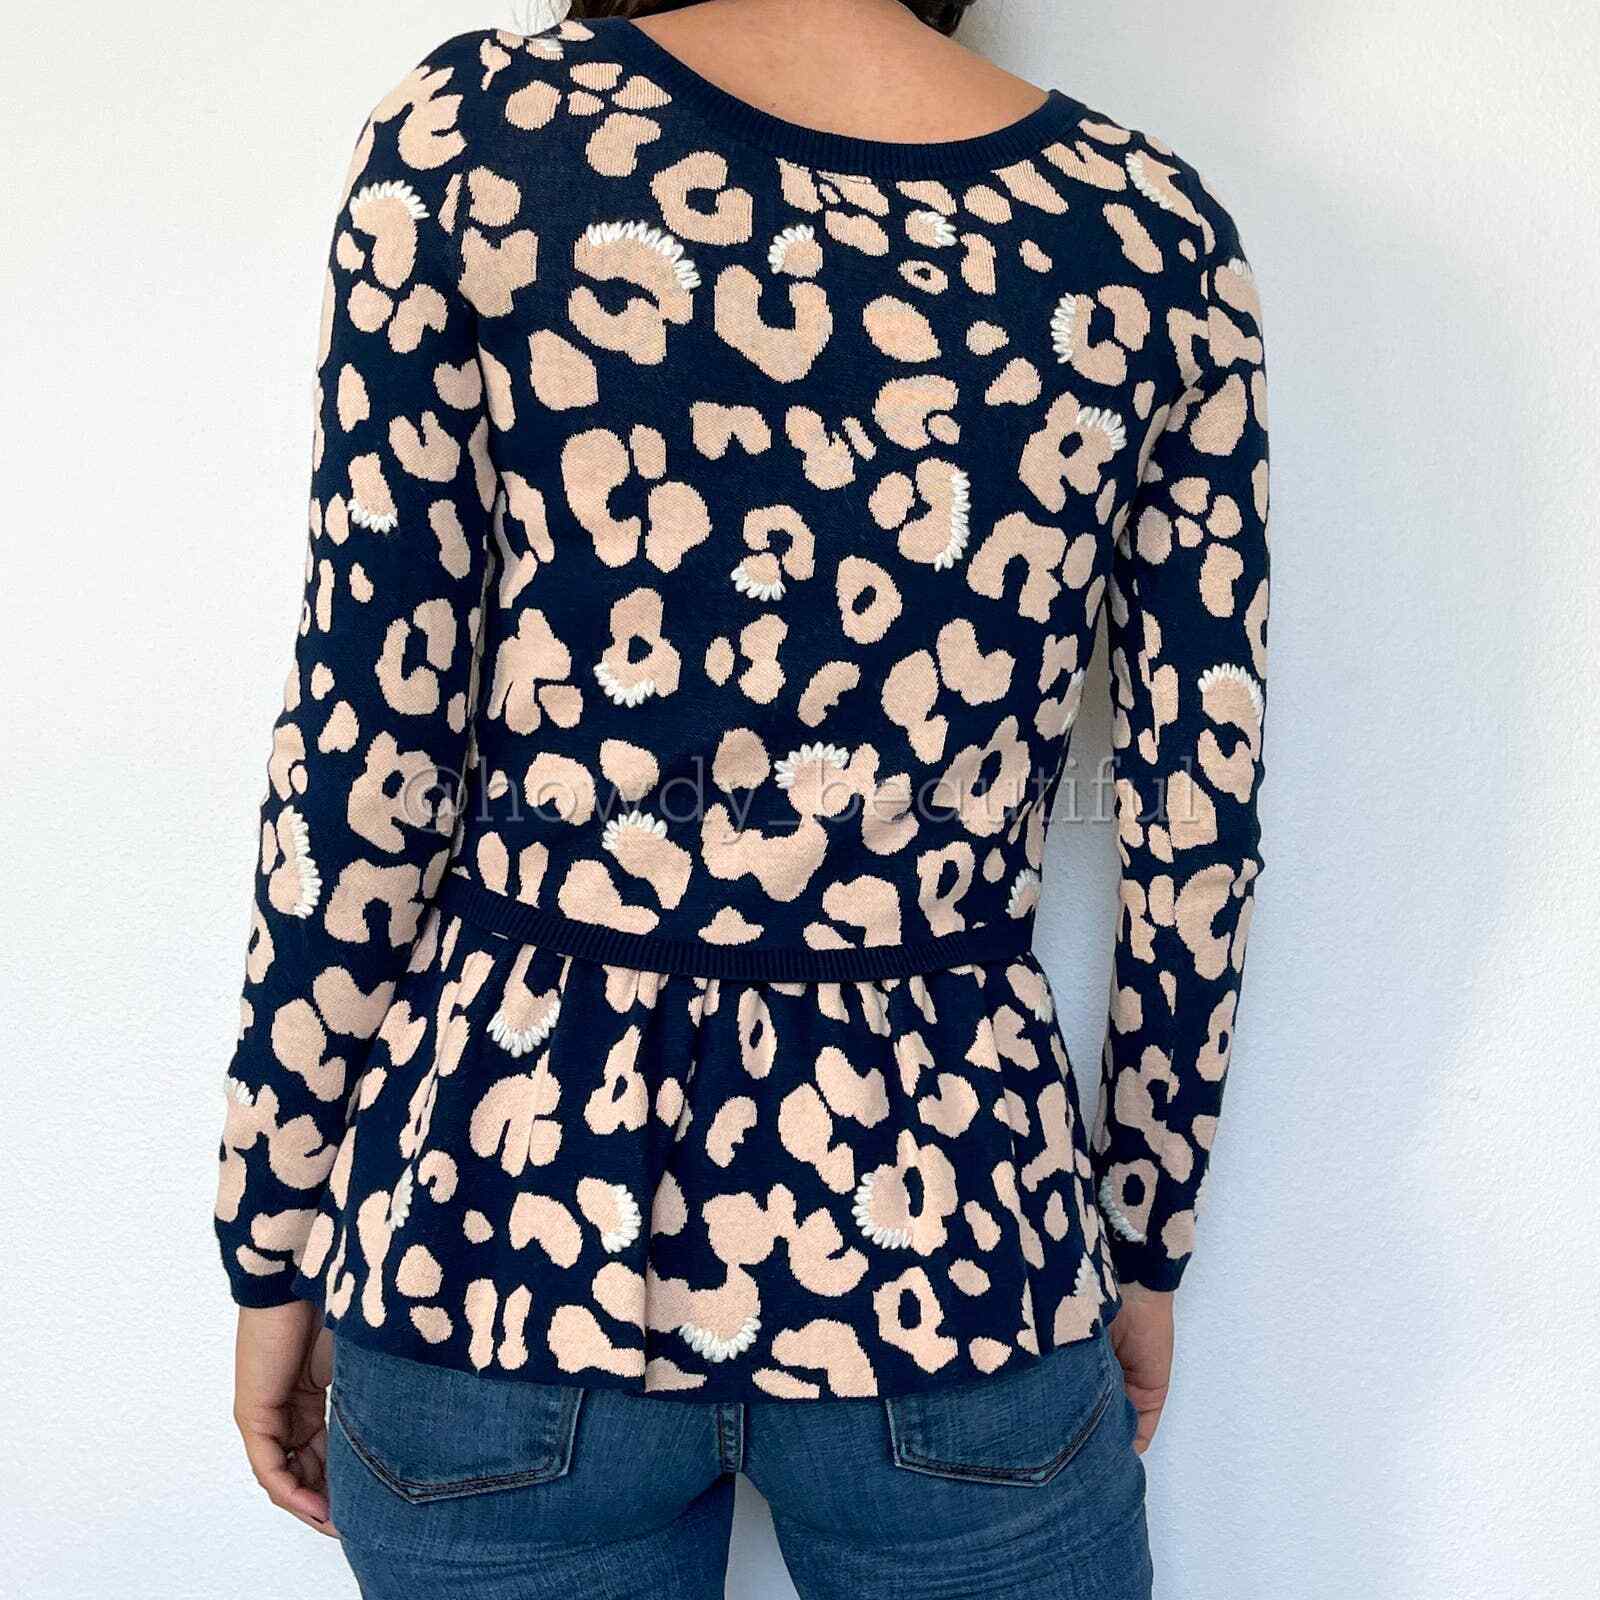 Moth Leopard Peplum Sweater Top Various Sizes Navy Color NW ANTHROPOLOGIE Tag